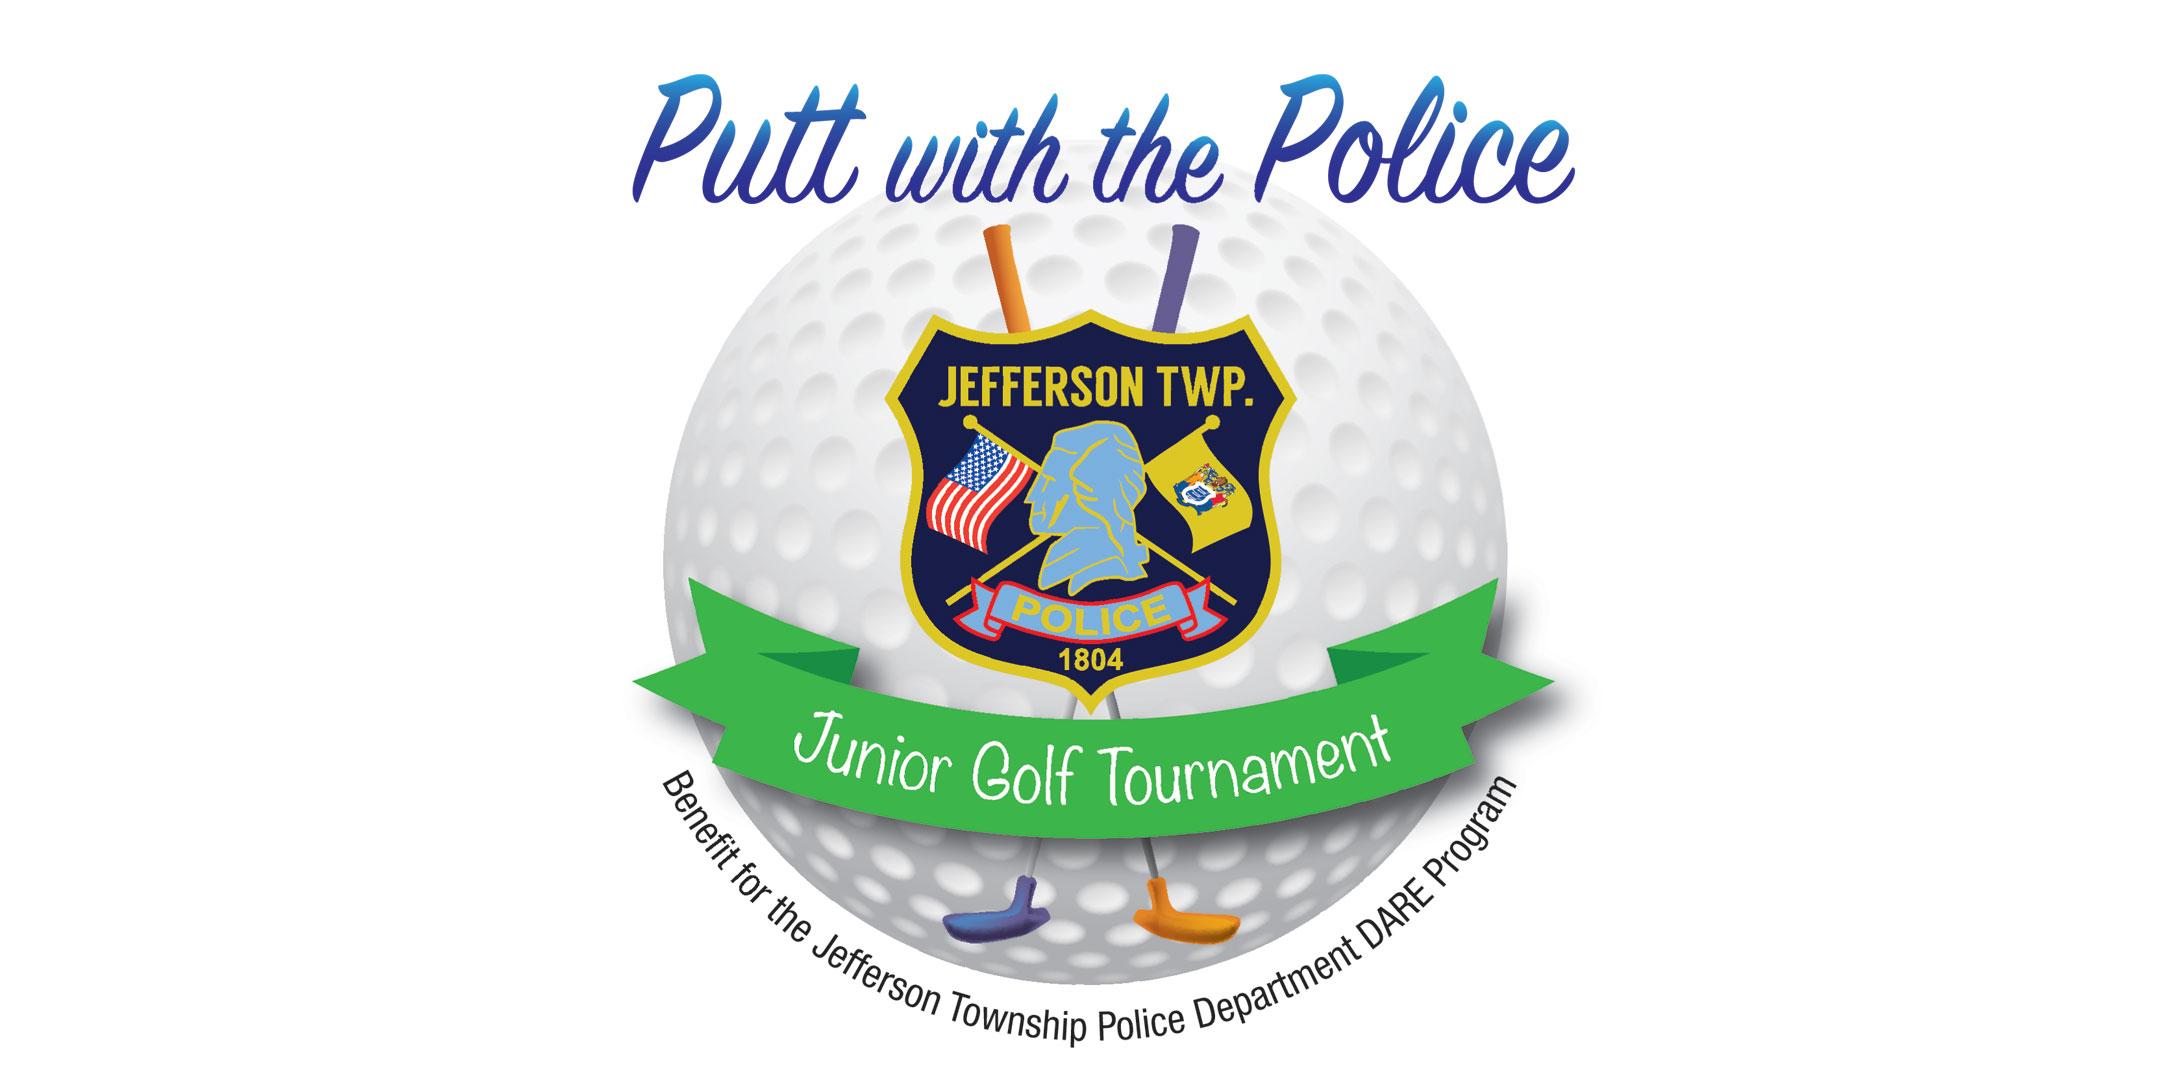 3rd Annual “Putt with the Police” Jr Golf Tournament